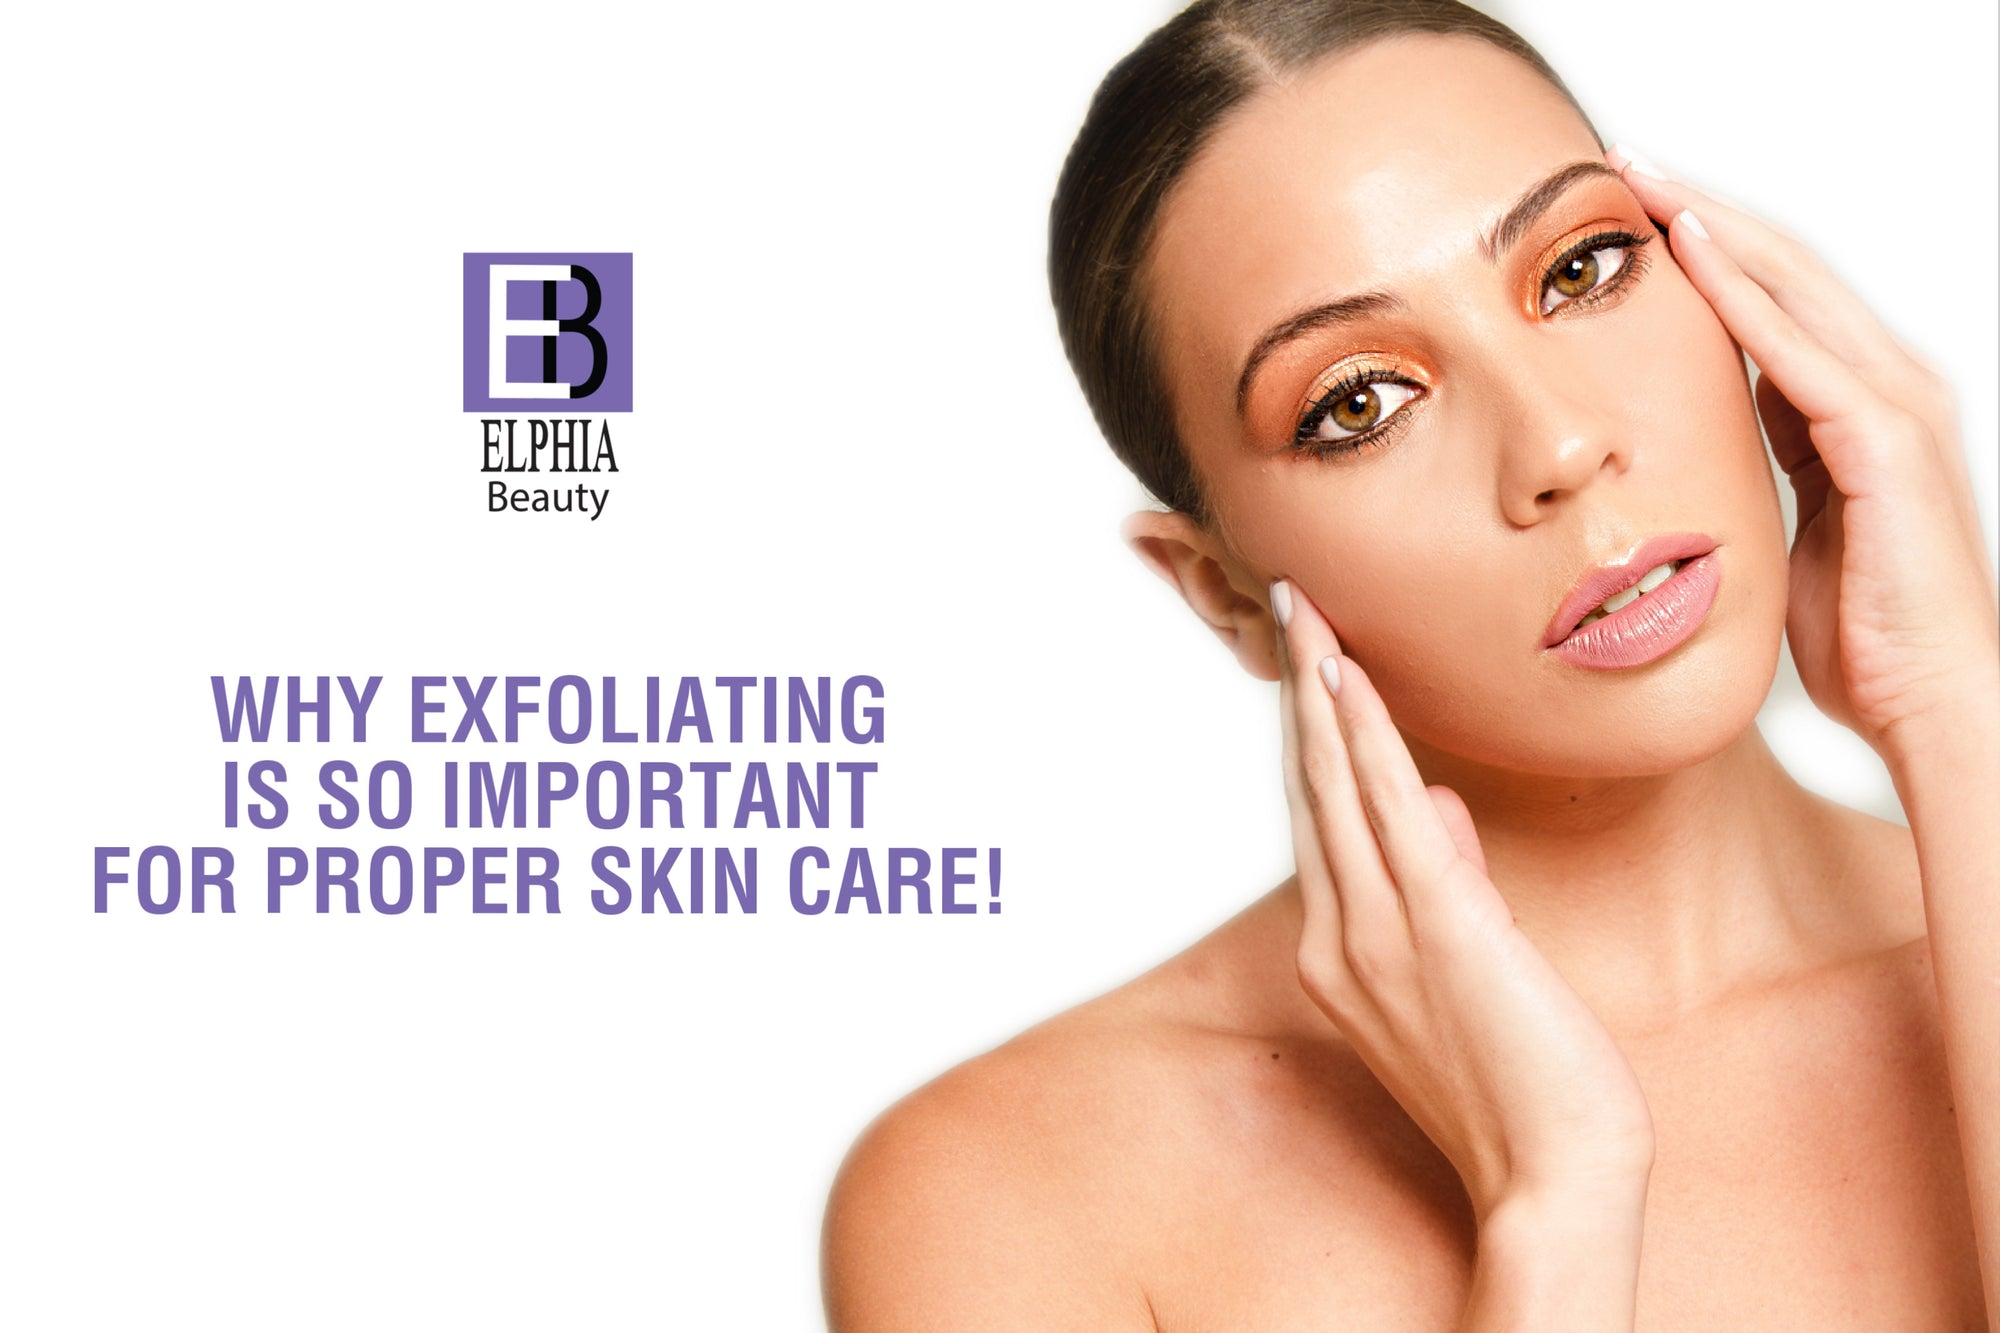 Why Exfoliating is So Important for Proper Skin Care